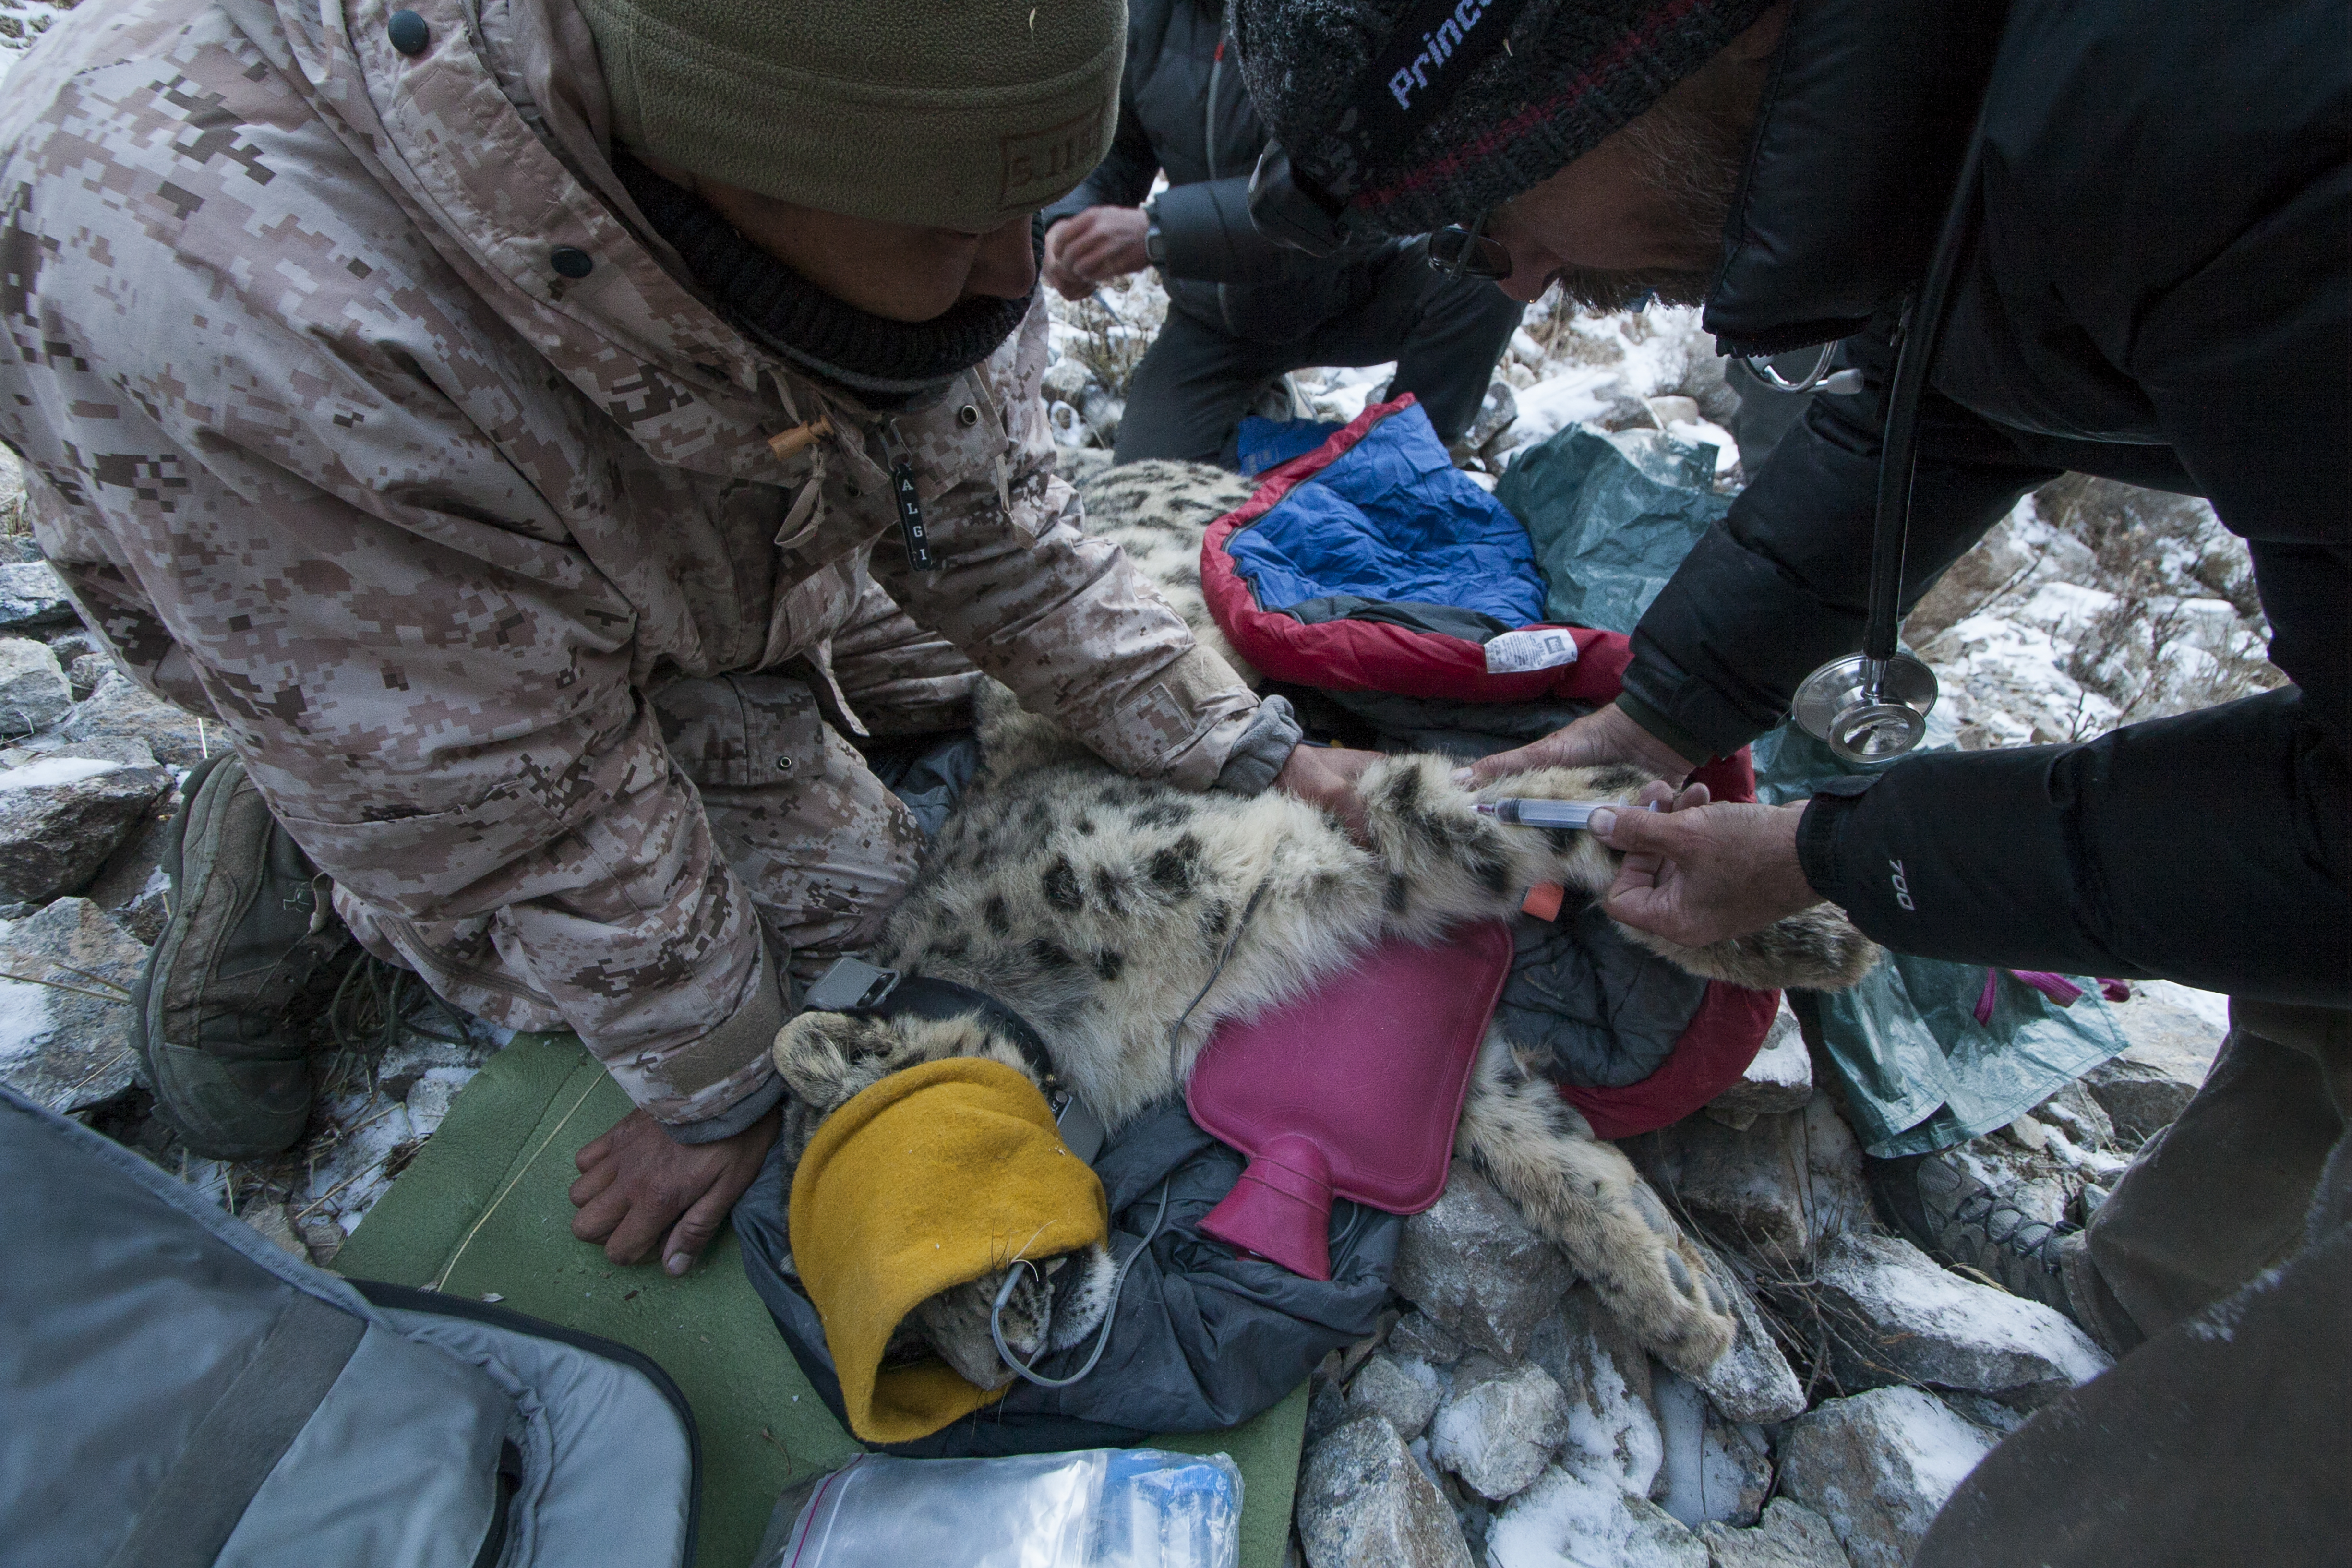 "Snow Leopard veterinarian, Ric Berlinski, and ranger, Urmat Solokov, drawing blood during collaring of male snow leopard, Sarychat-Ertash Strict Nature Reserve, Tien Shan Mountains, eastern Kyrgyzstan"